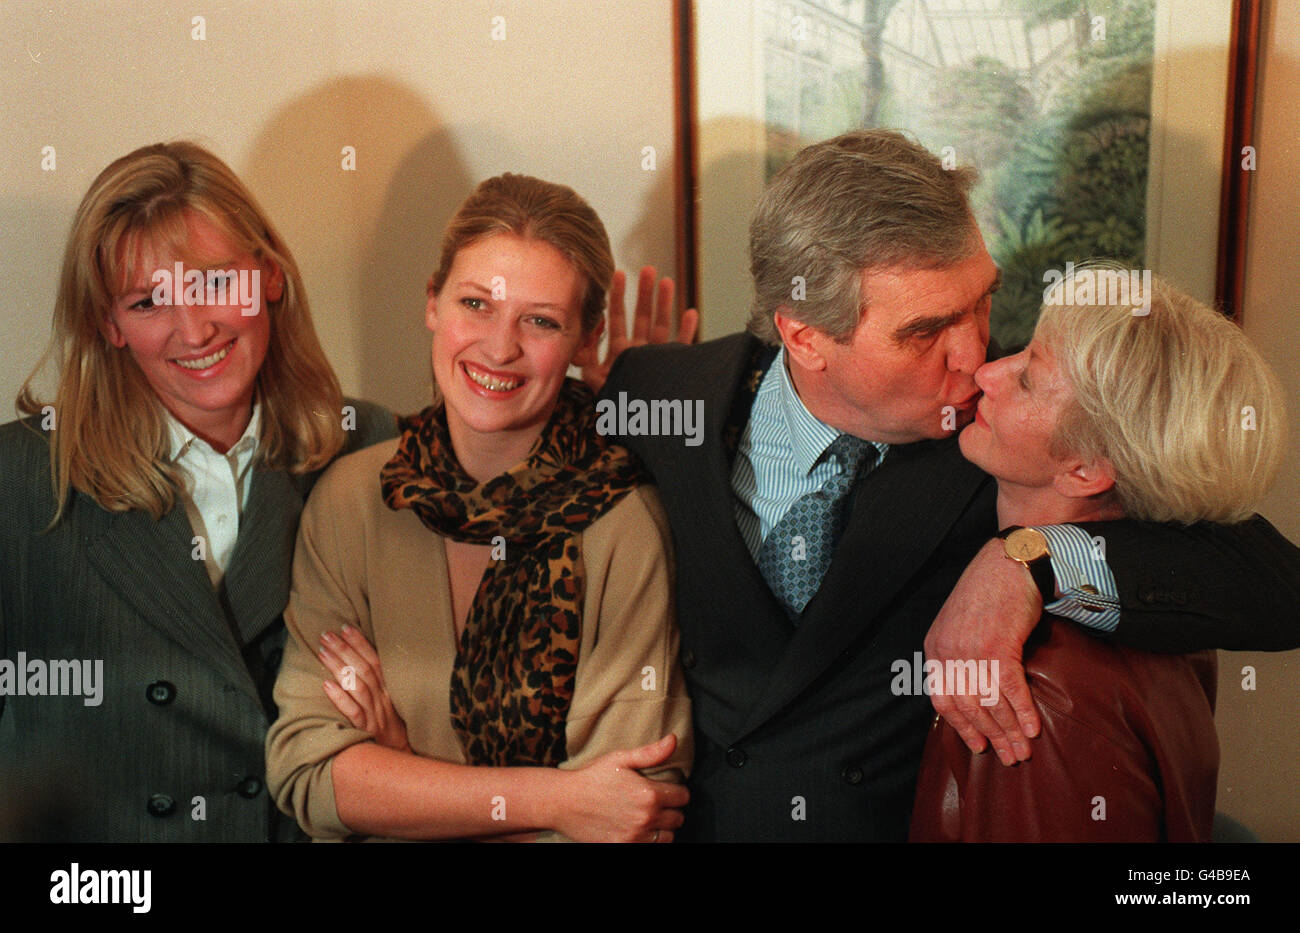 PA NEWS PHOTO 24/10/94 FORMER LEISURE TYCOON GEORGE WALKER WITH DAUGHTERS SARAH (LEFT), ROMIA AND HIS WIFE JEAN (KISSING) AFTER HE WAS CLEARED OF MASTERMINDING A 19.3 MILLION POUND PROFITS FRAUD AT SOUTHWARK CROWN COURT, LONDON Stock Photo